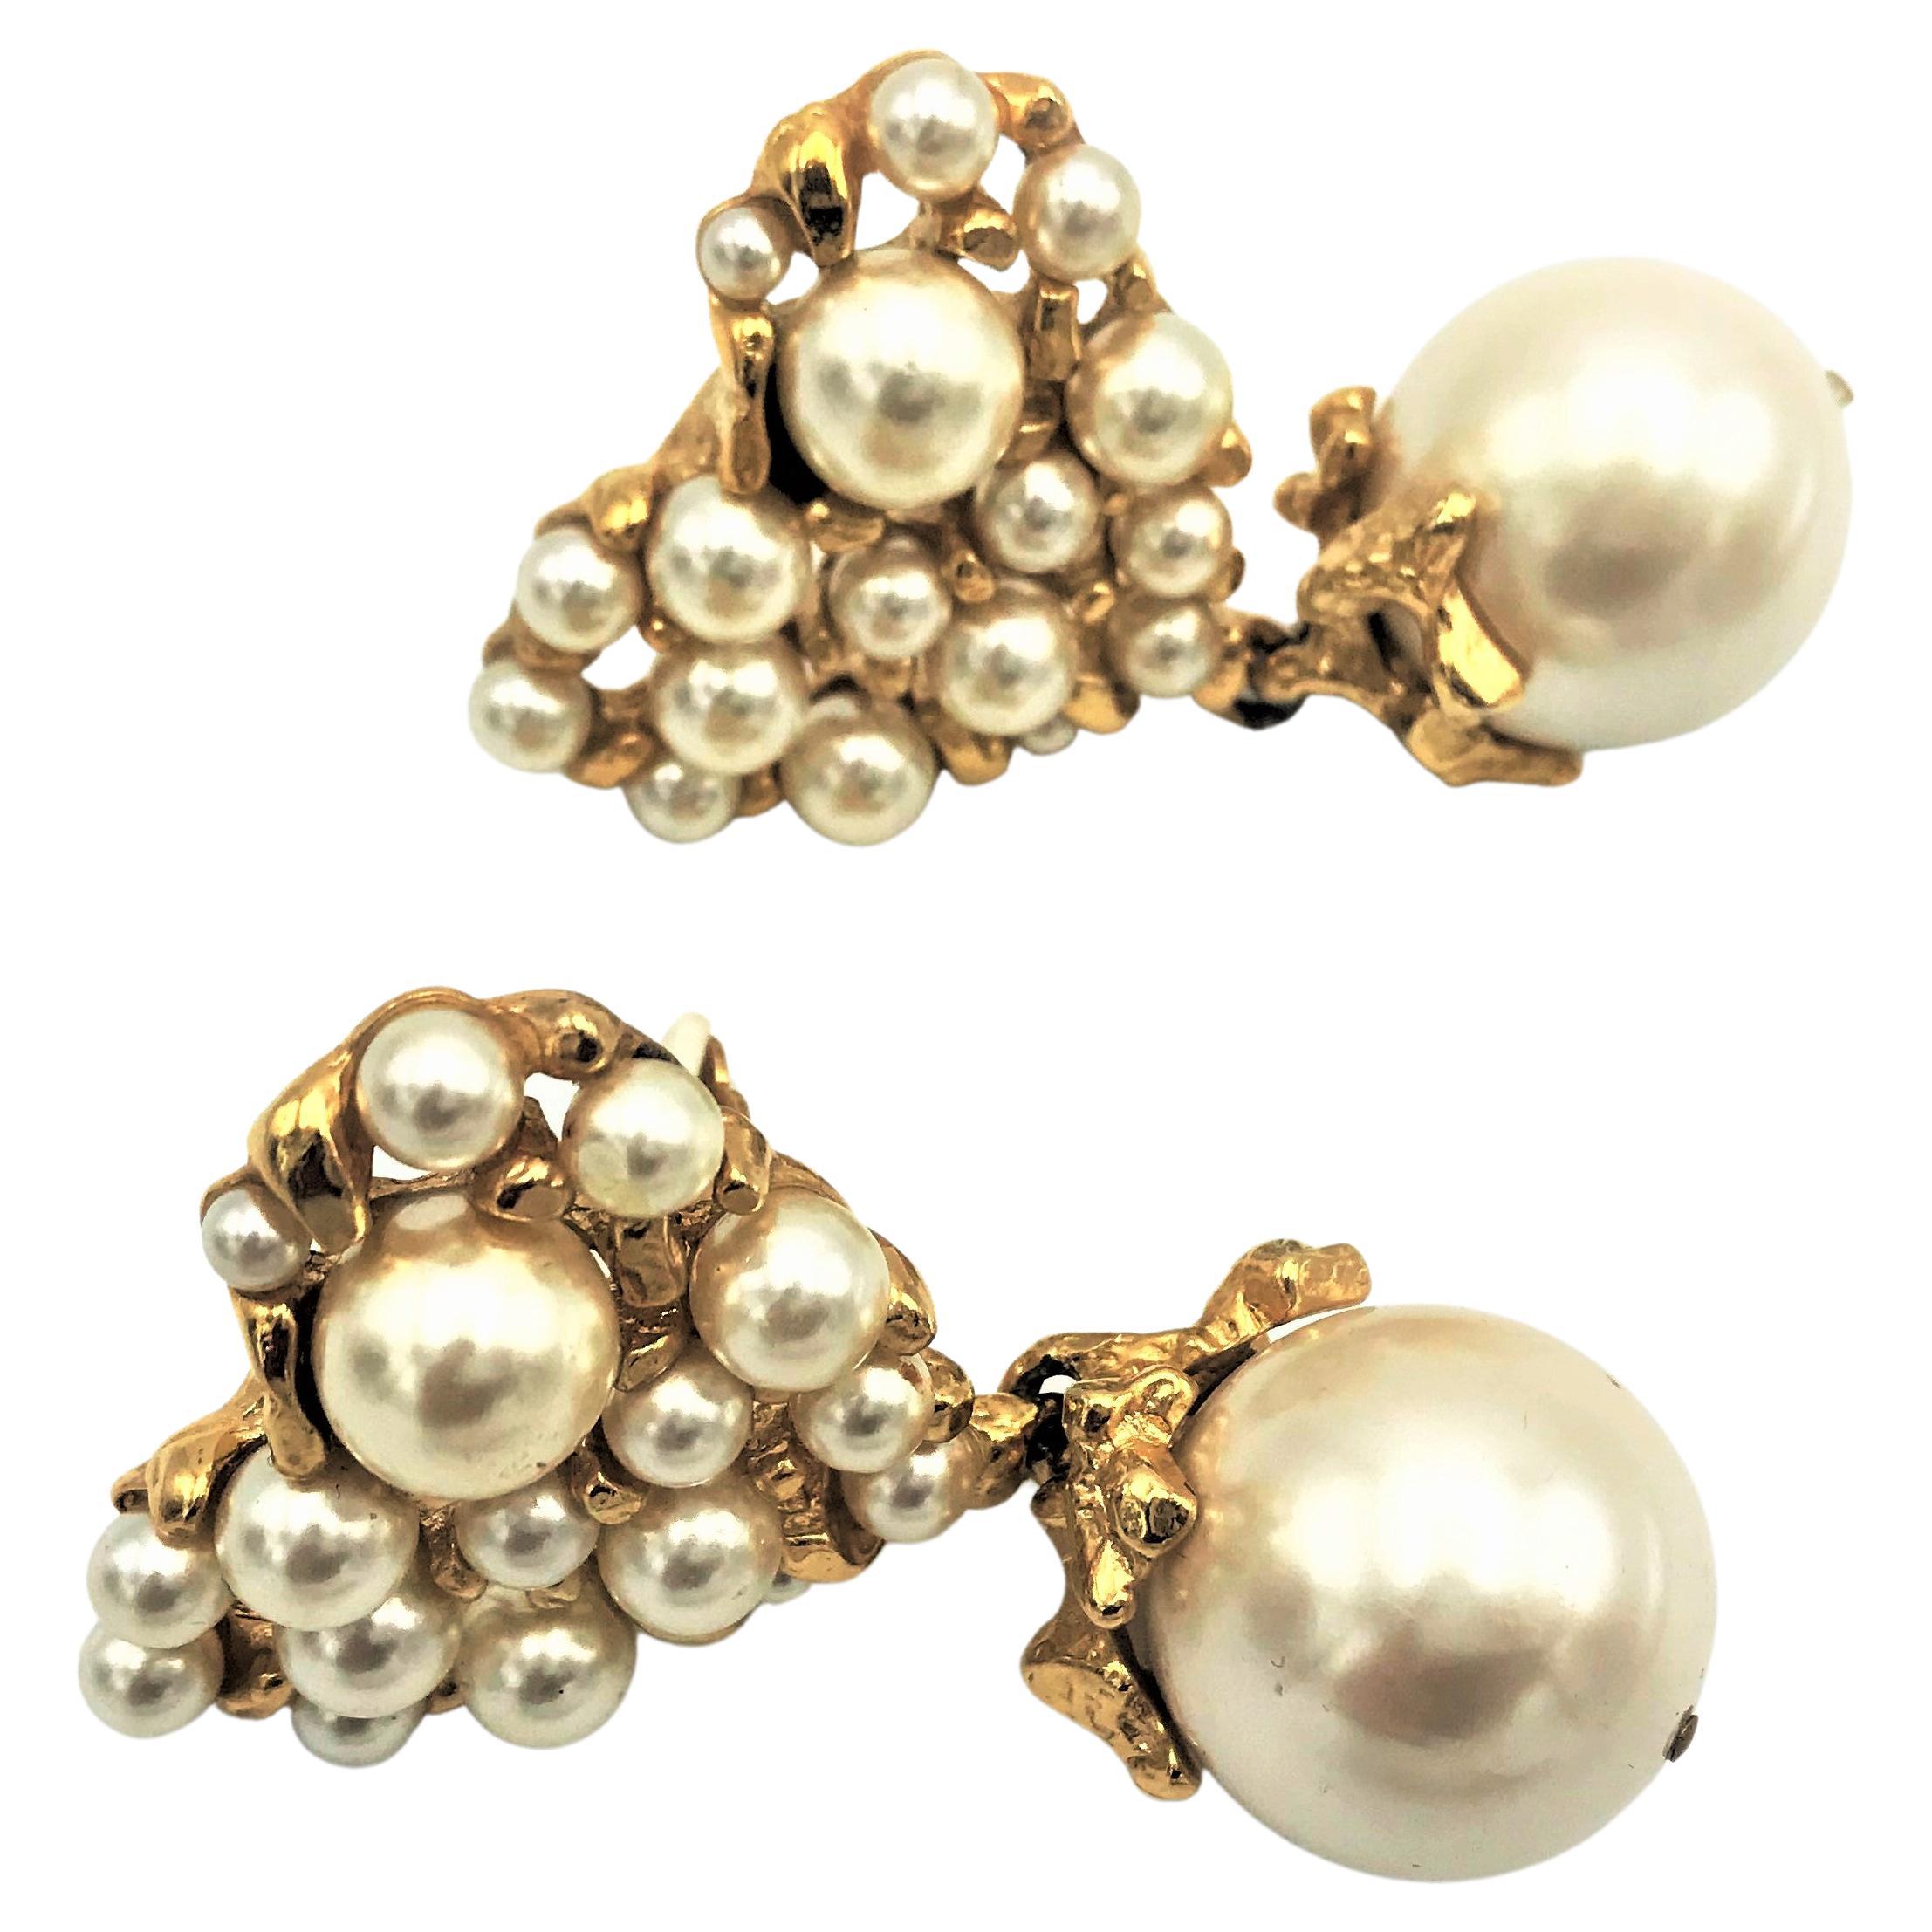 A fantastic ear clip from Laroche Paris around the 1990s.
The upper part in the shape of a large heart, filled with false pearls of different sizes, from which a large decorative false pearl hangs.
Measurement: The full length of the ear clip 7 cm,